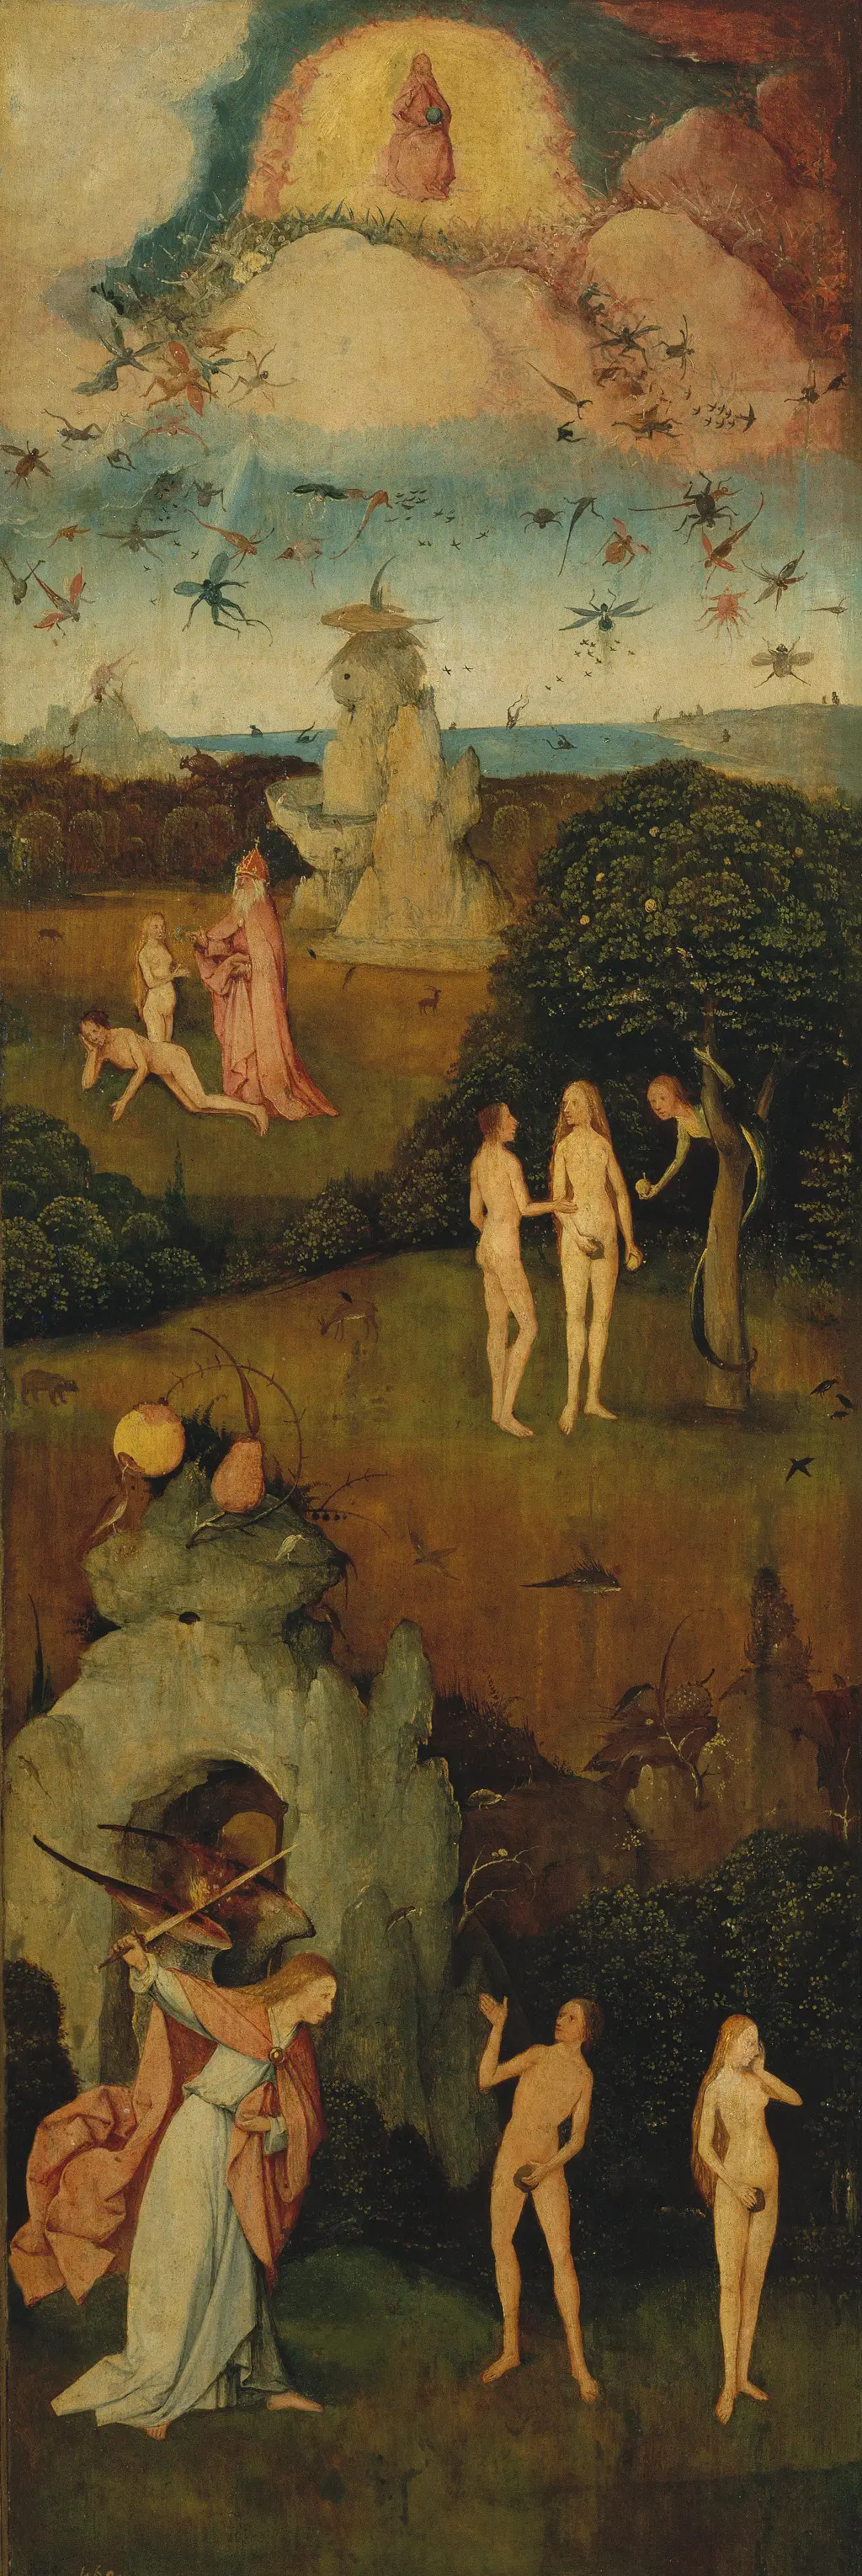 The Genesis of Evil and the Loss of Paradise in Detail Hieronymus Bosch